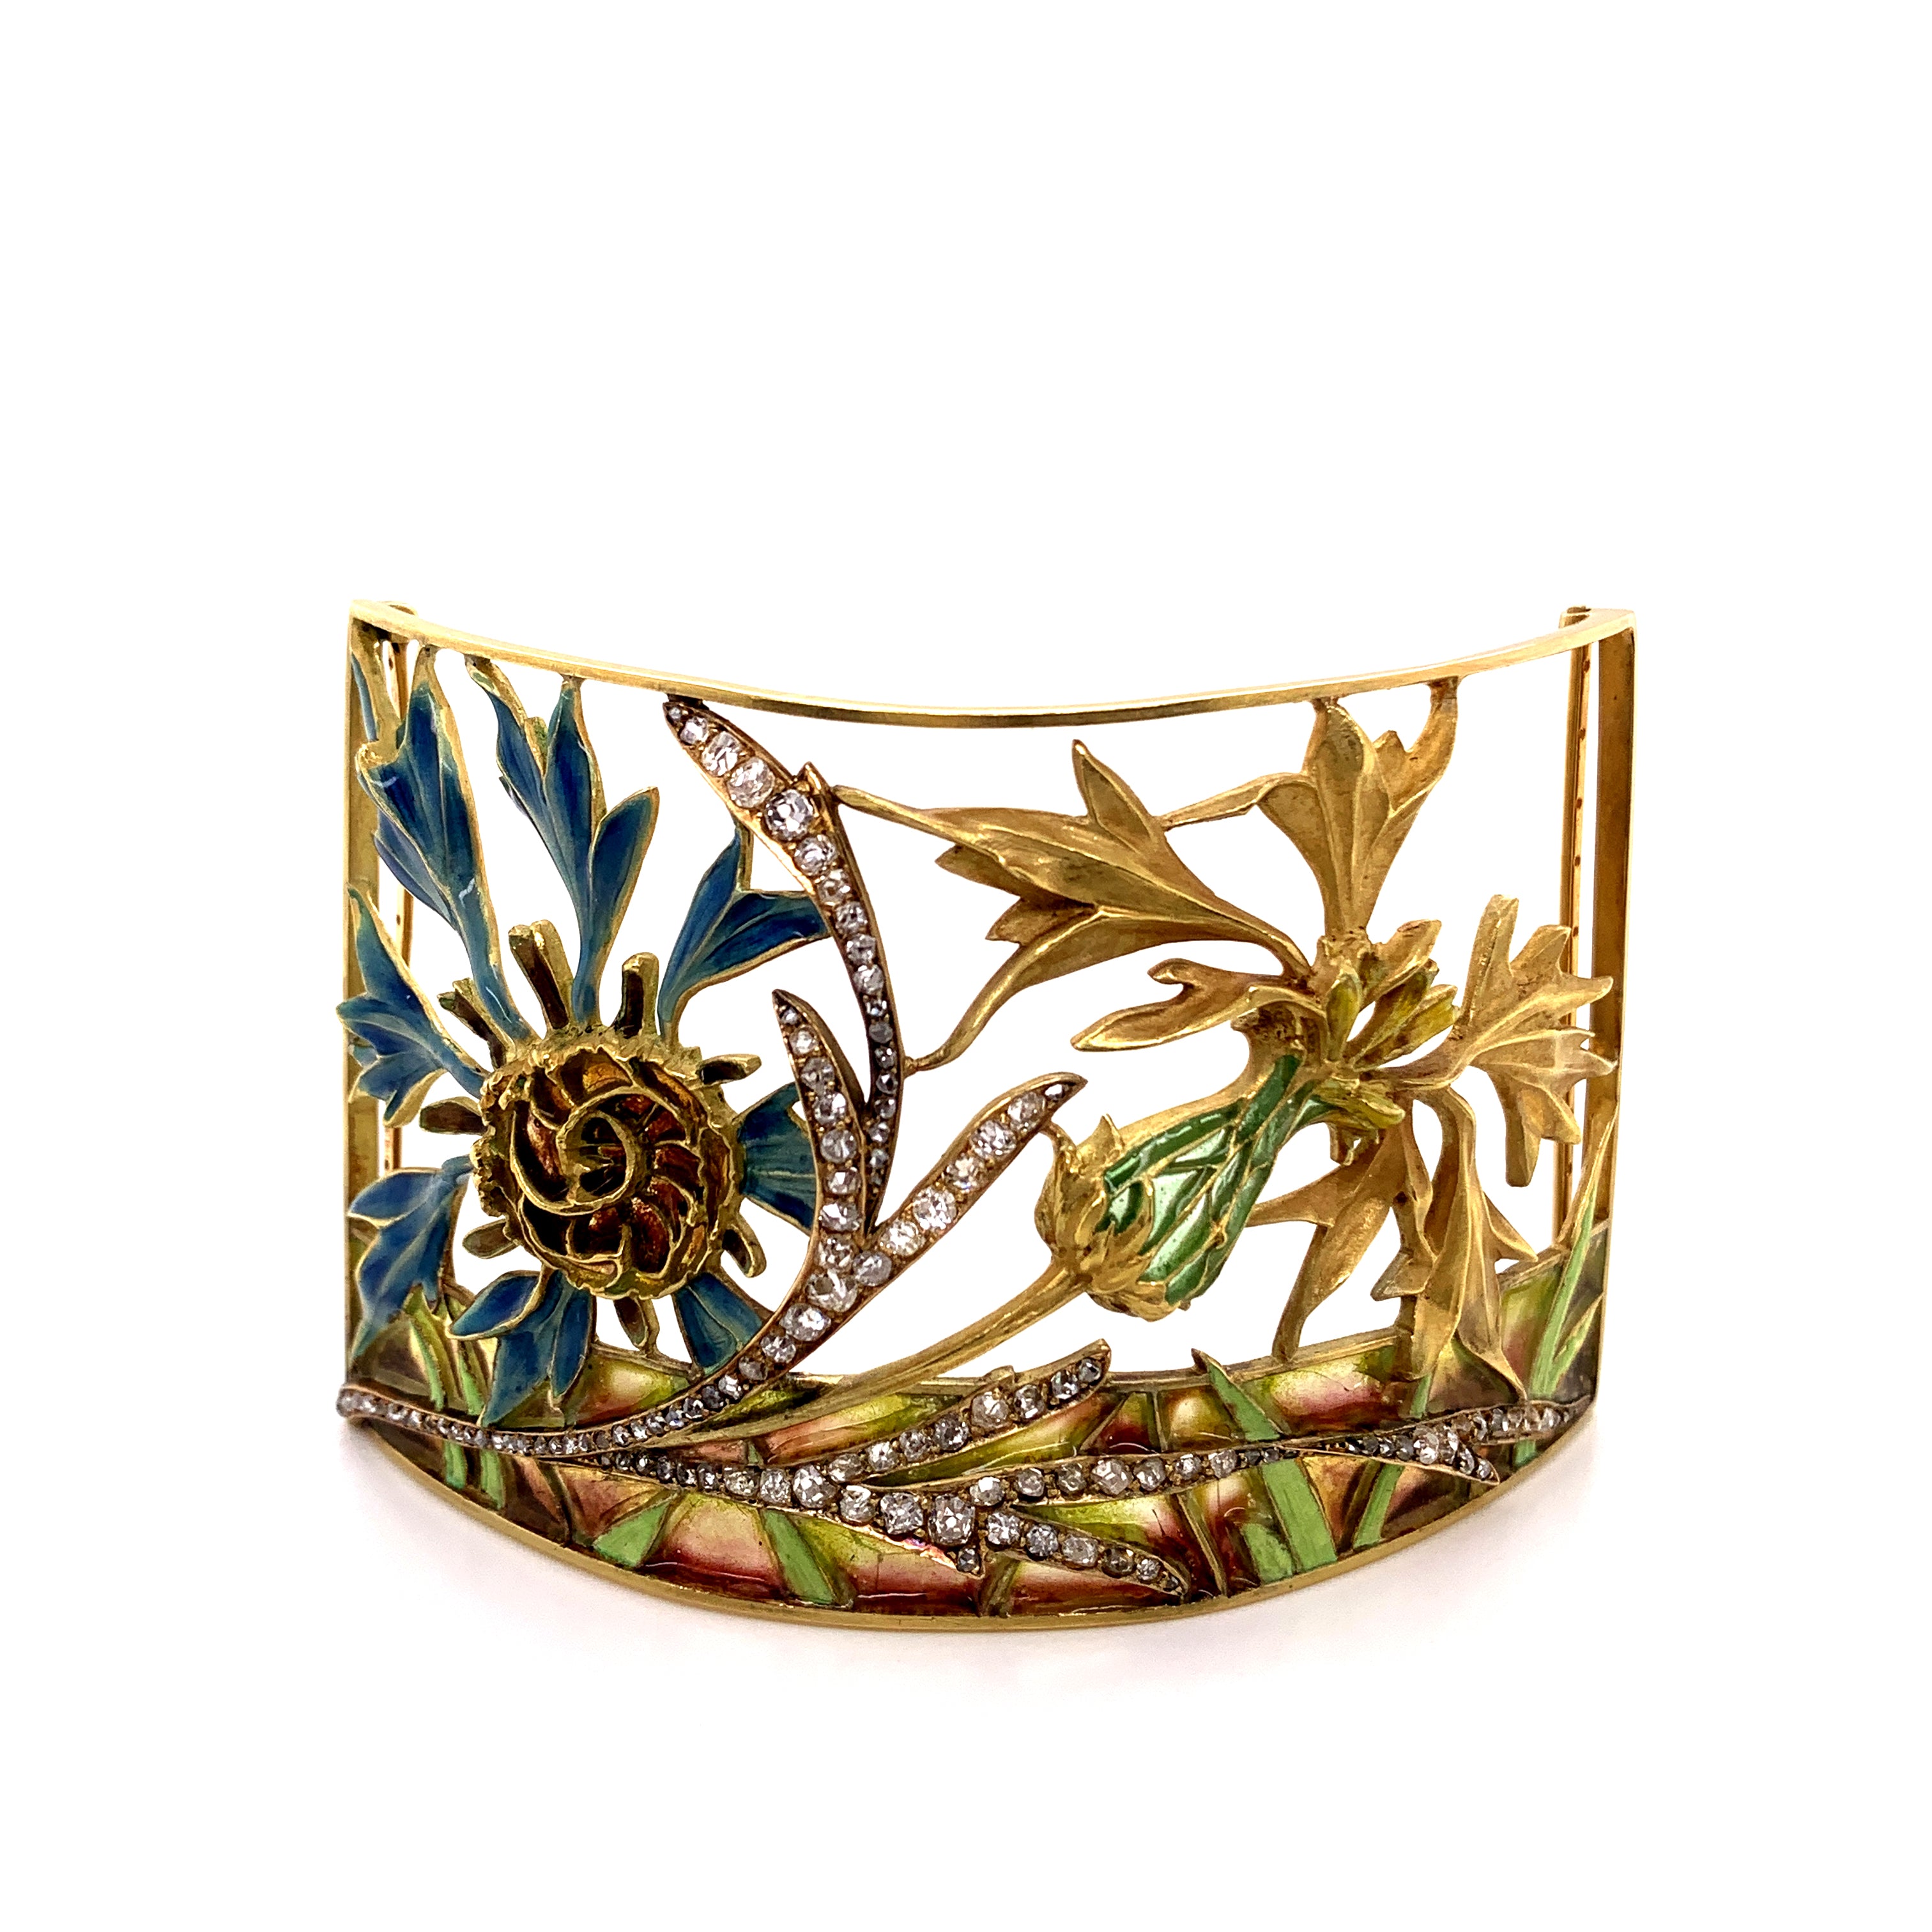 example of Art Nouveau jewelry